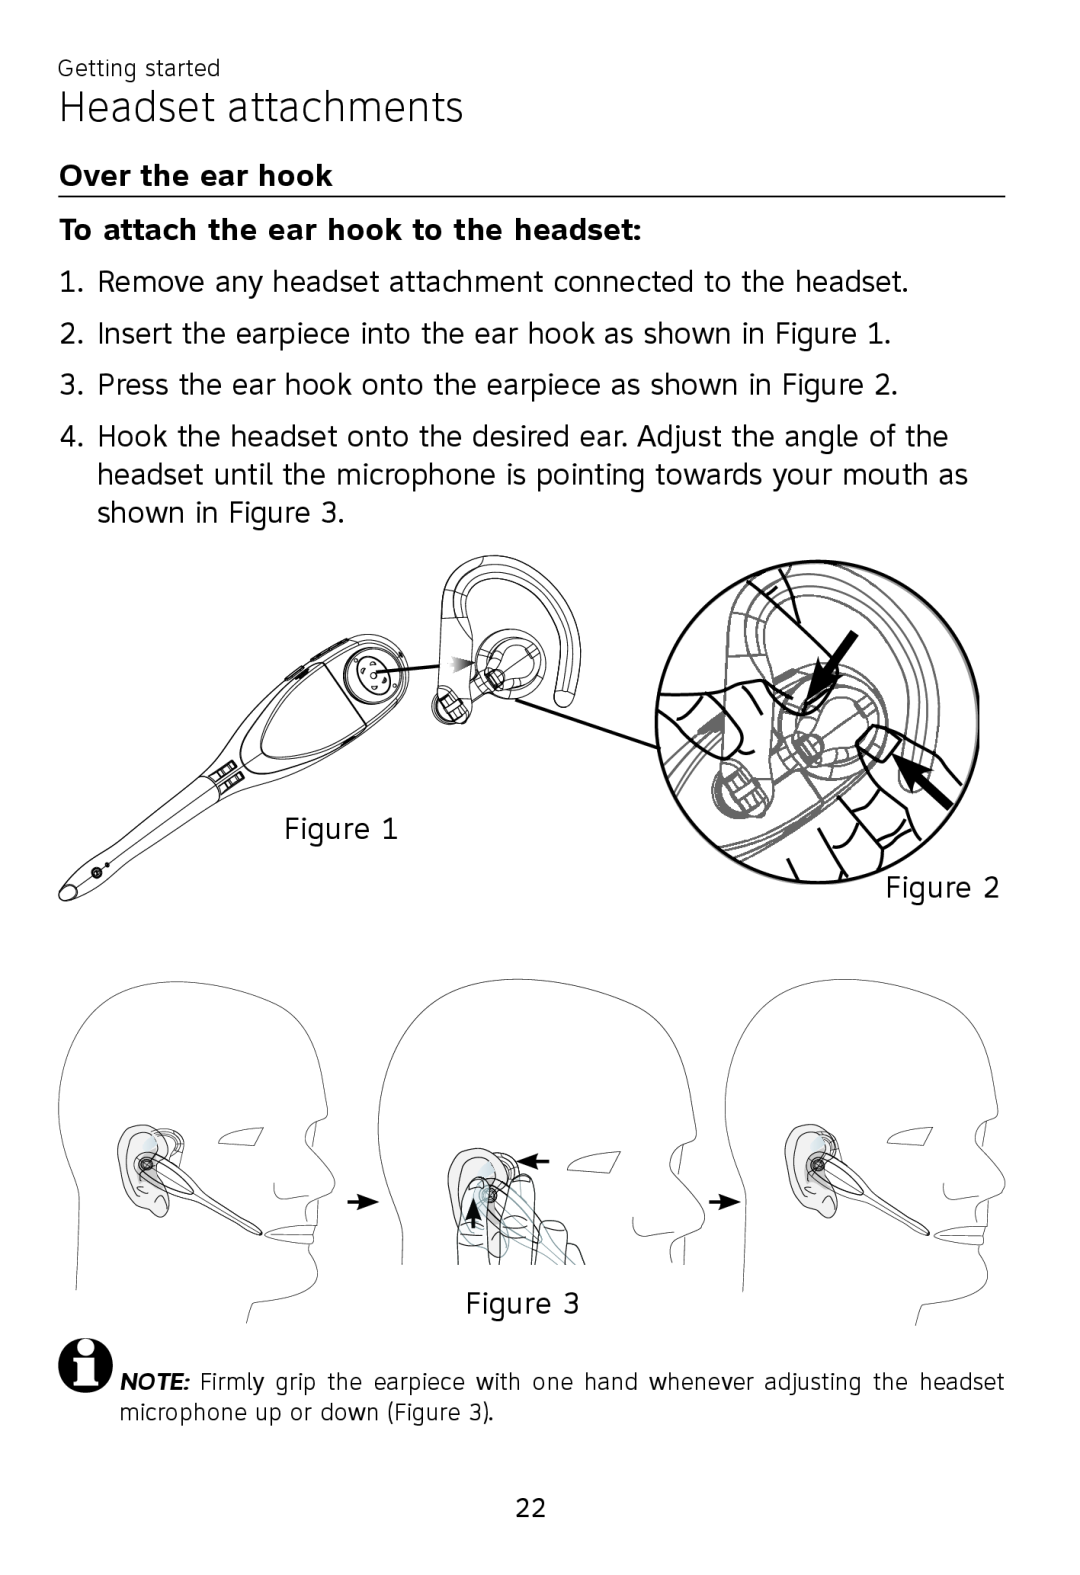 AT&T TL 7610 user manual Headset attachments, Over the ear hook To attach the ear hook to the headset 